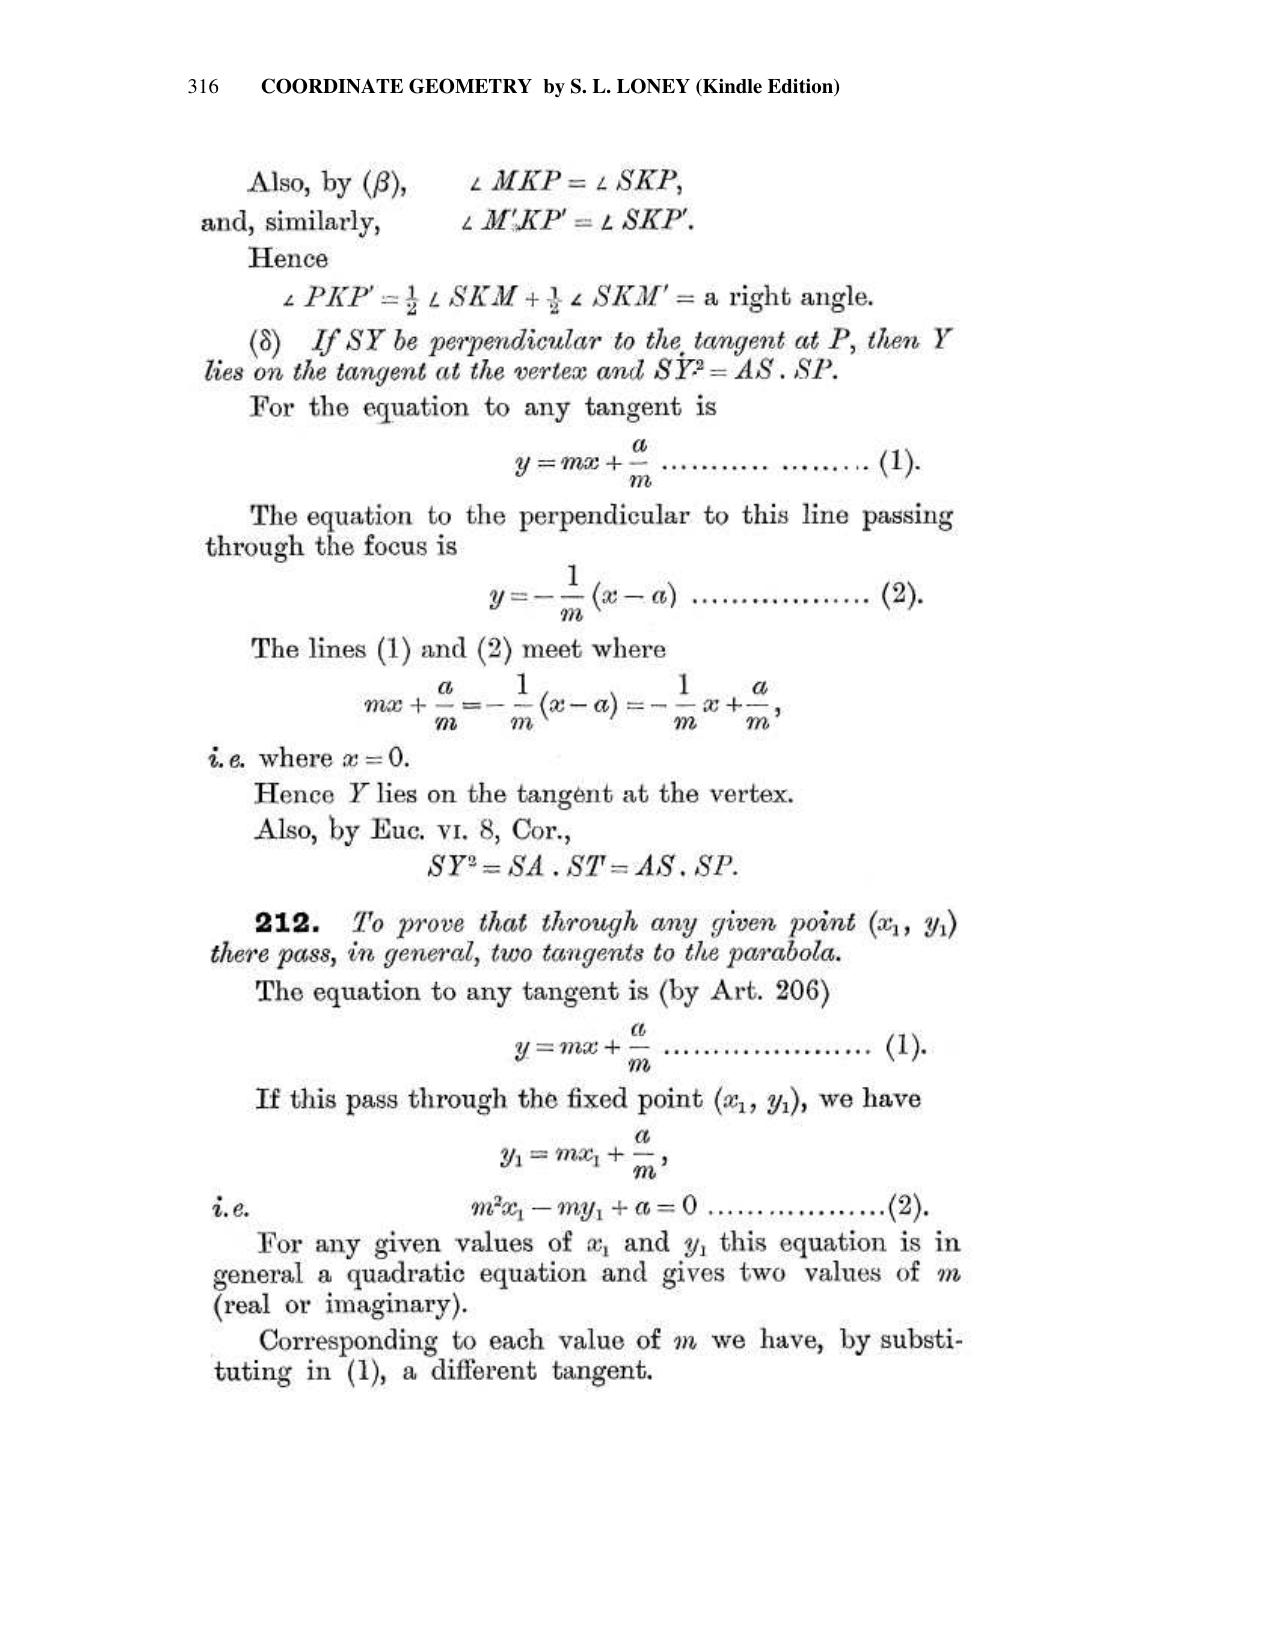 Chapter 10: The Parabola - SL Loney Solutions: The Elements of Coordinate Geometry - Page 30